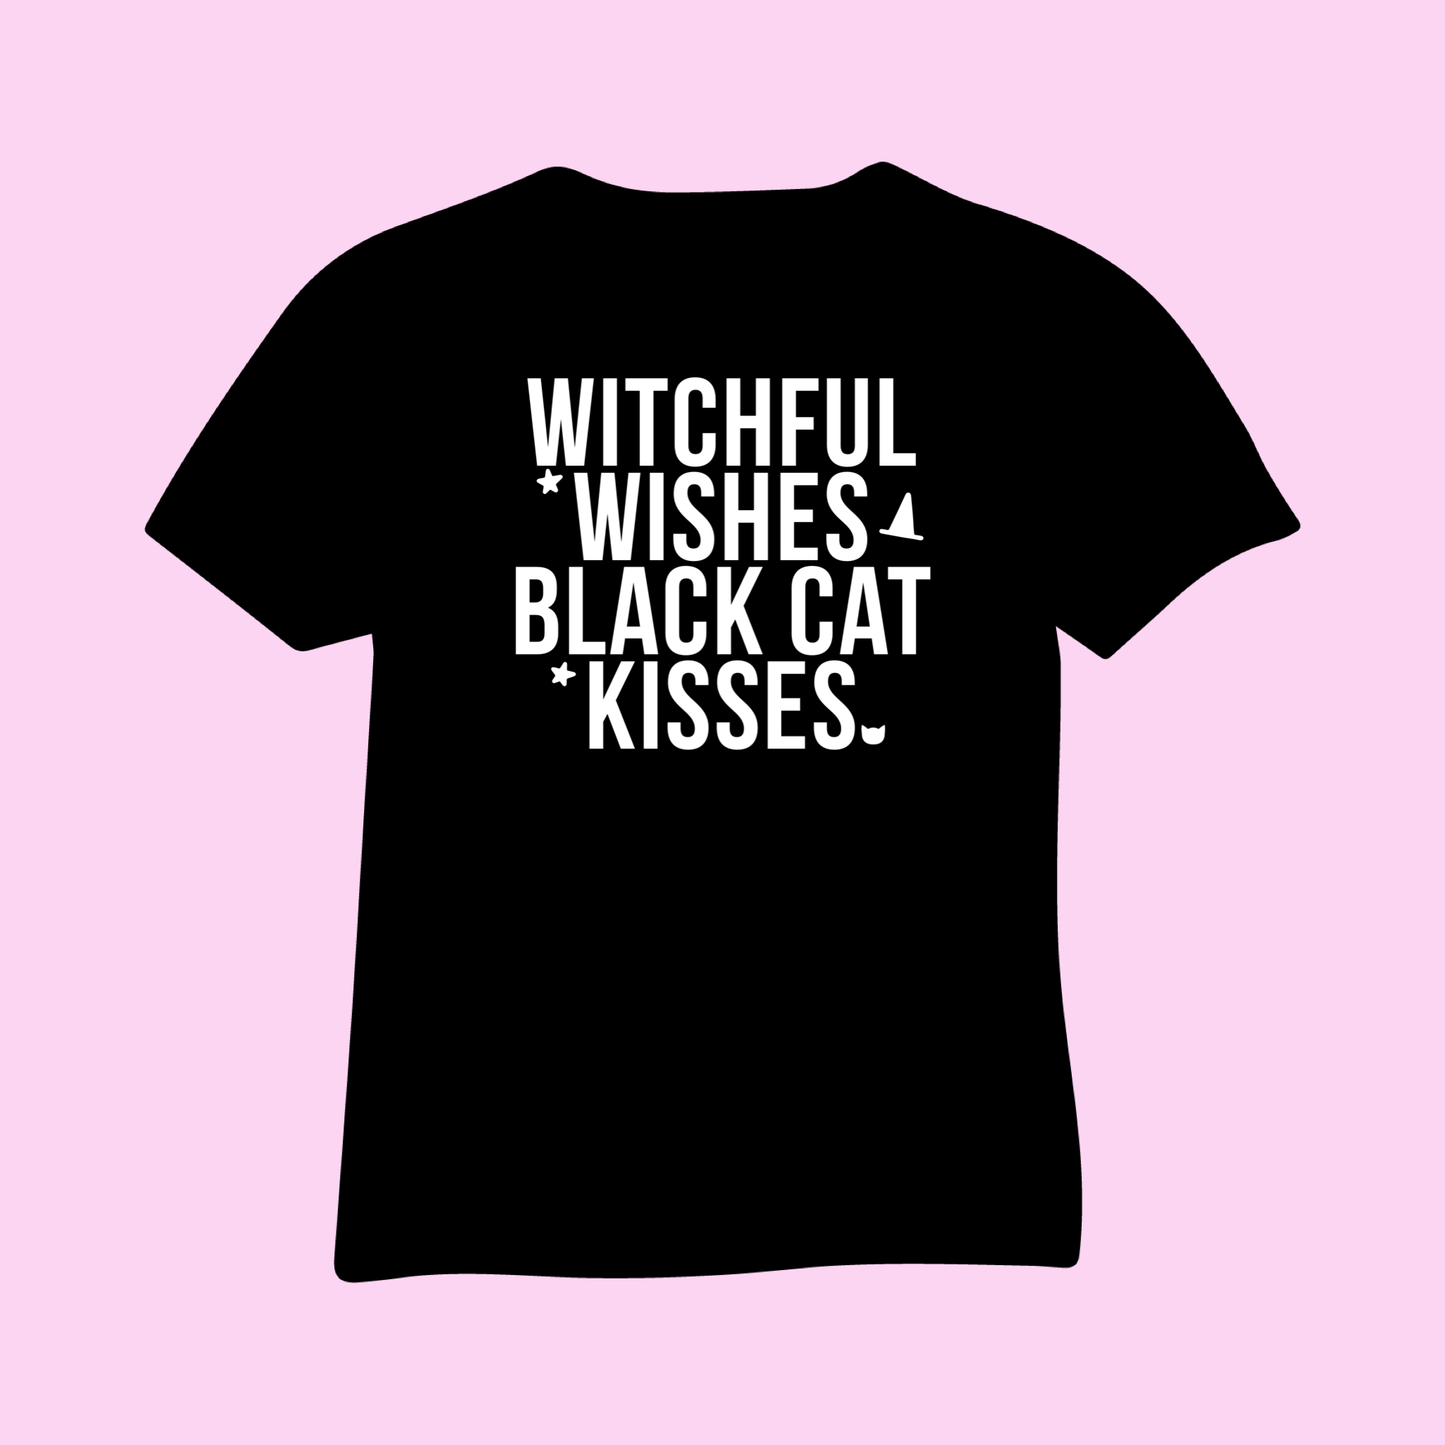 Witchful wishes